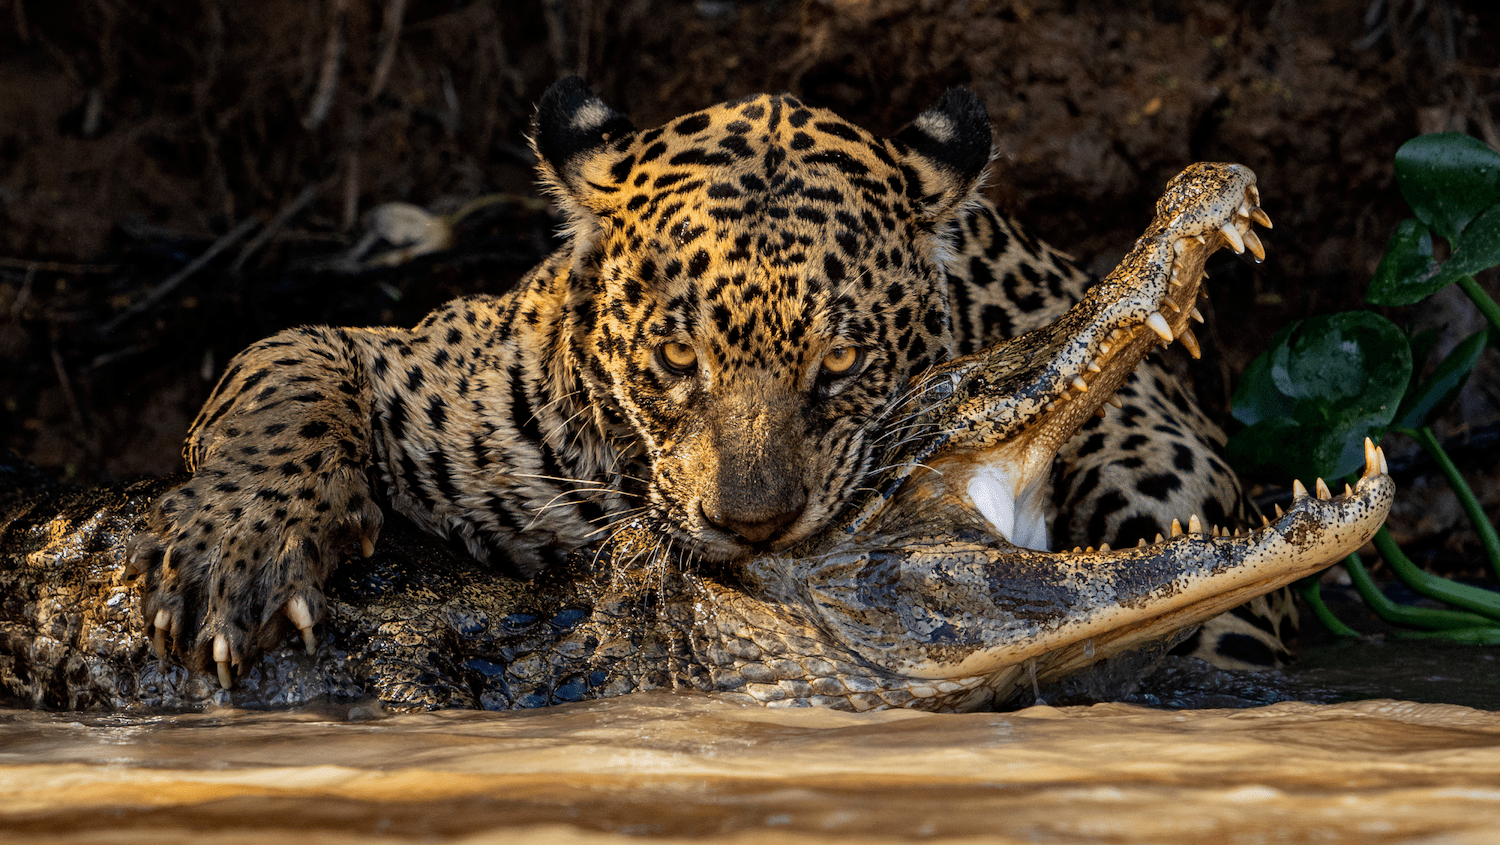 12 wildlife photos showing the metal, serene, and cheeky side of nature